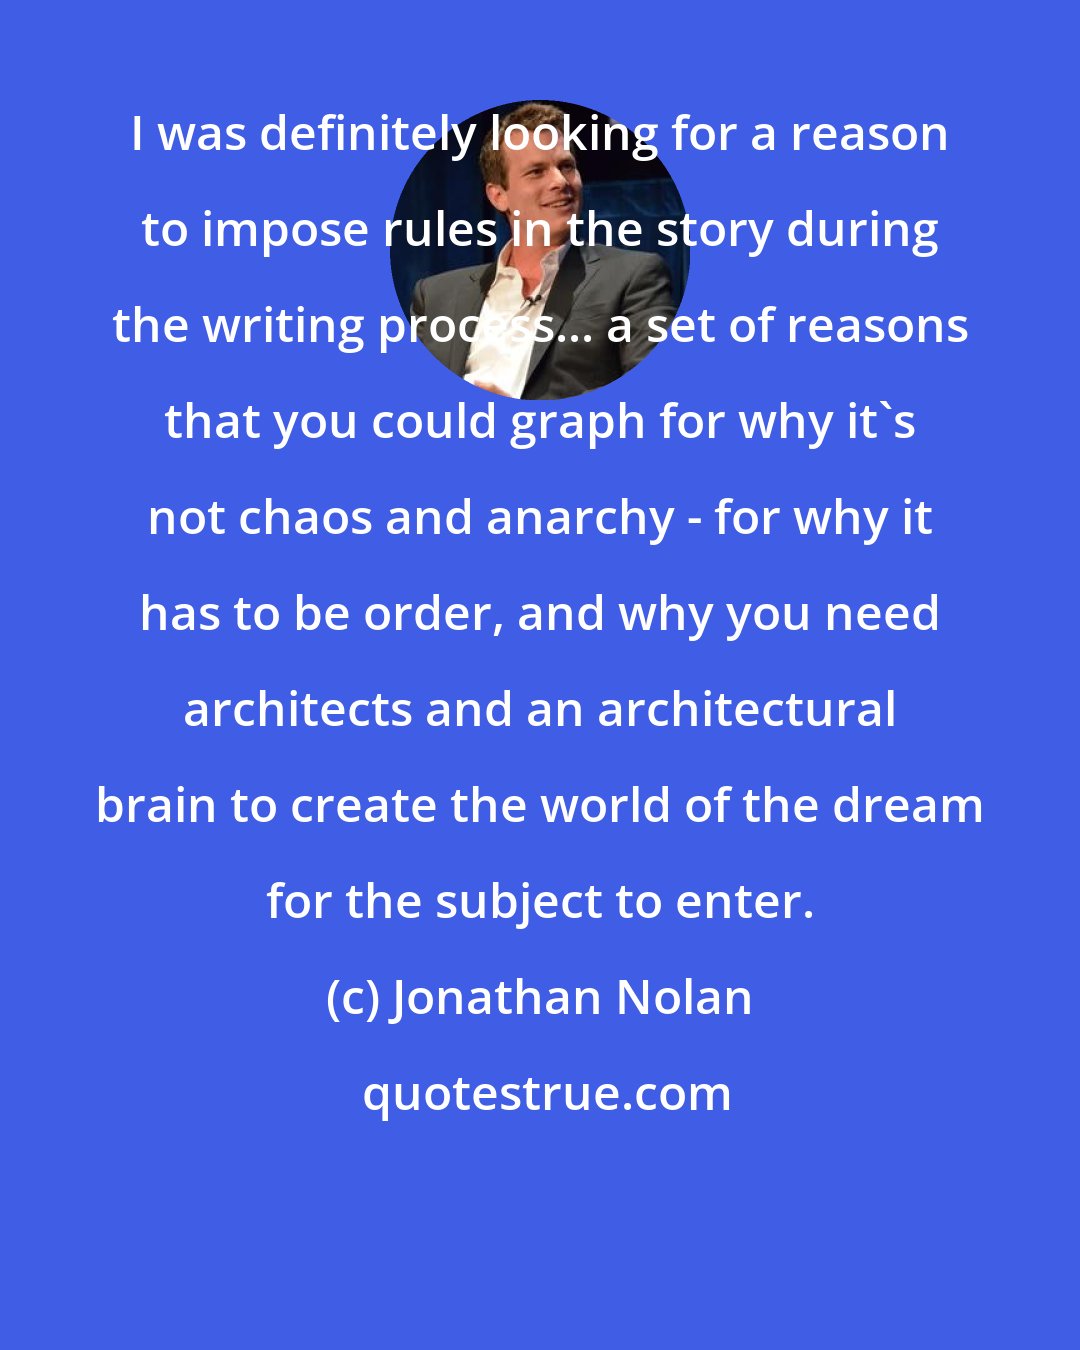 Jonathan Nolan: I was definitely looking for a reason to impose rules in the story during the writing process... a set of reasons that you could graph for why it's not chaos and anarchy - for why it has to be order, and why you need architects and an architectural brain to create the world of the dream for the subject to enter.